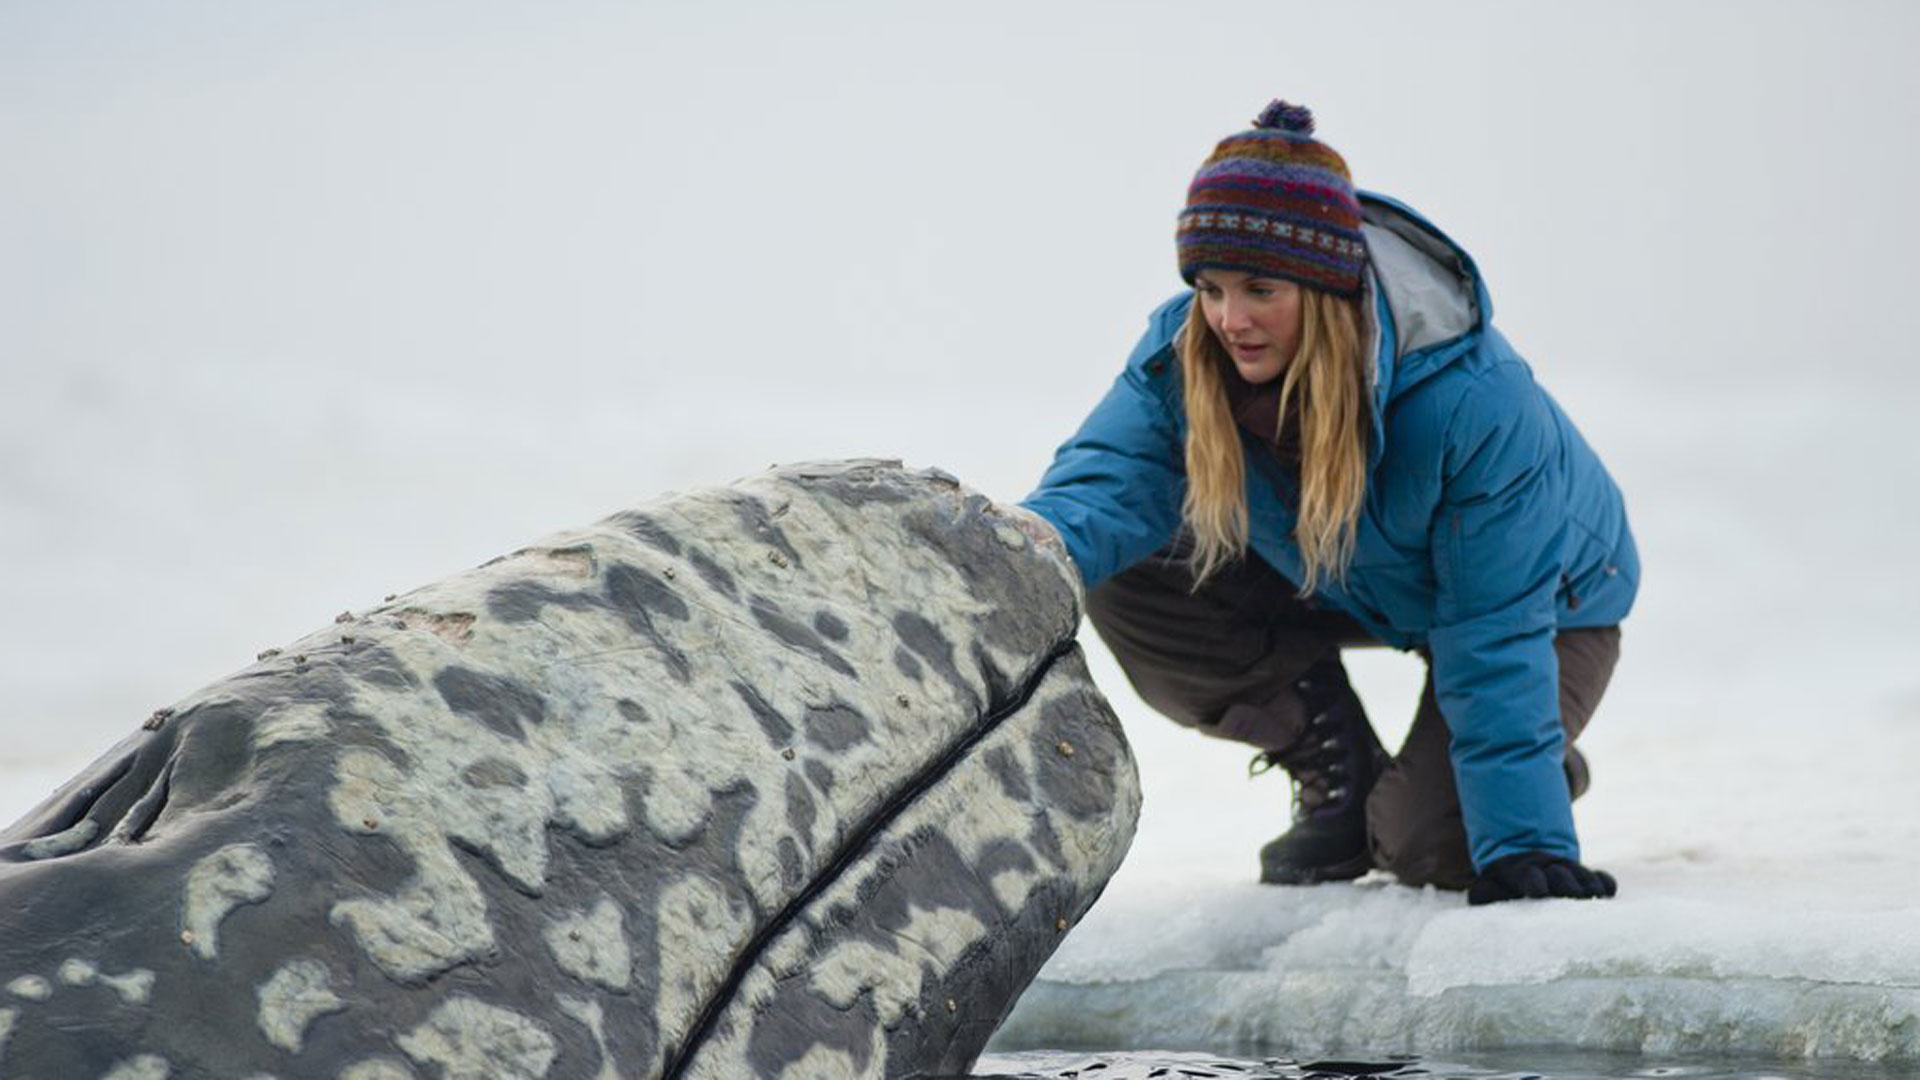 Big Miracle: Drew Barrymore as Rachel Kramer, based on Greenpeace activist Cindy Lowry. 1920x1080 Full HD Background.